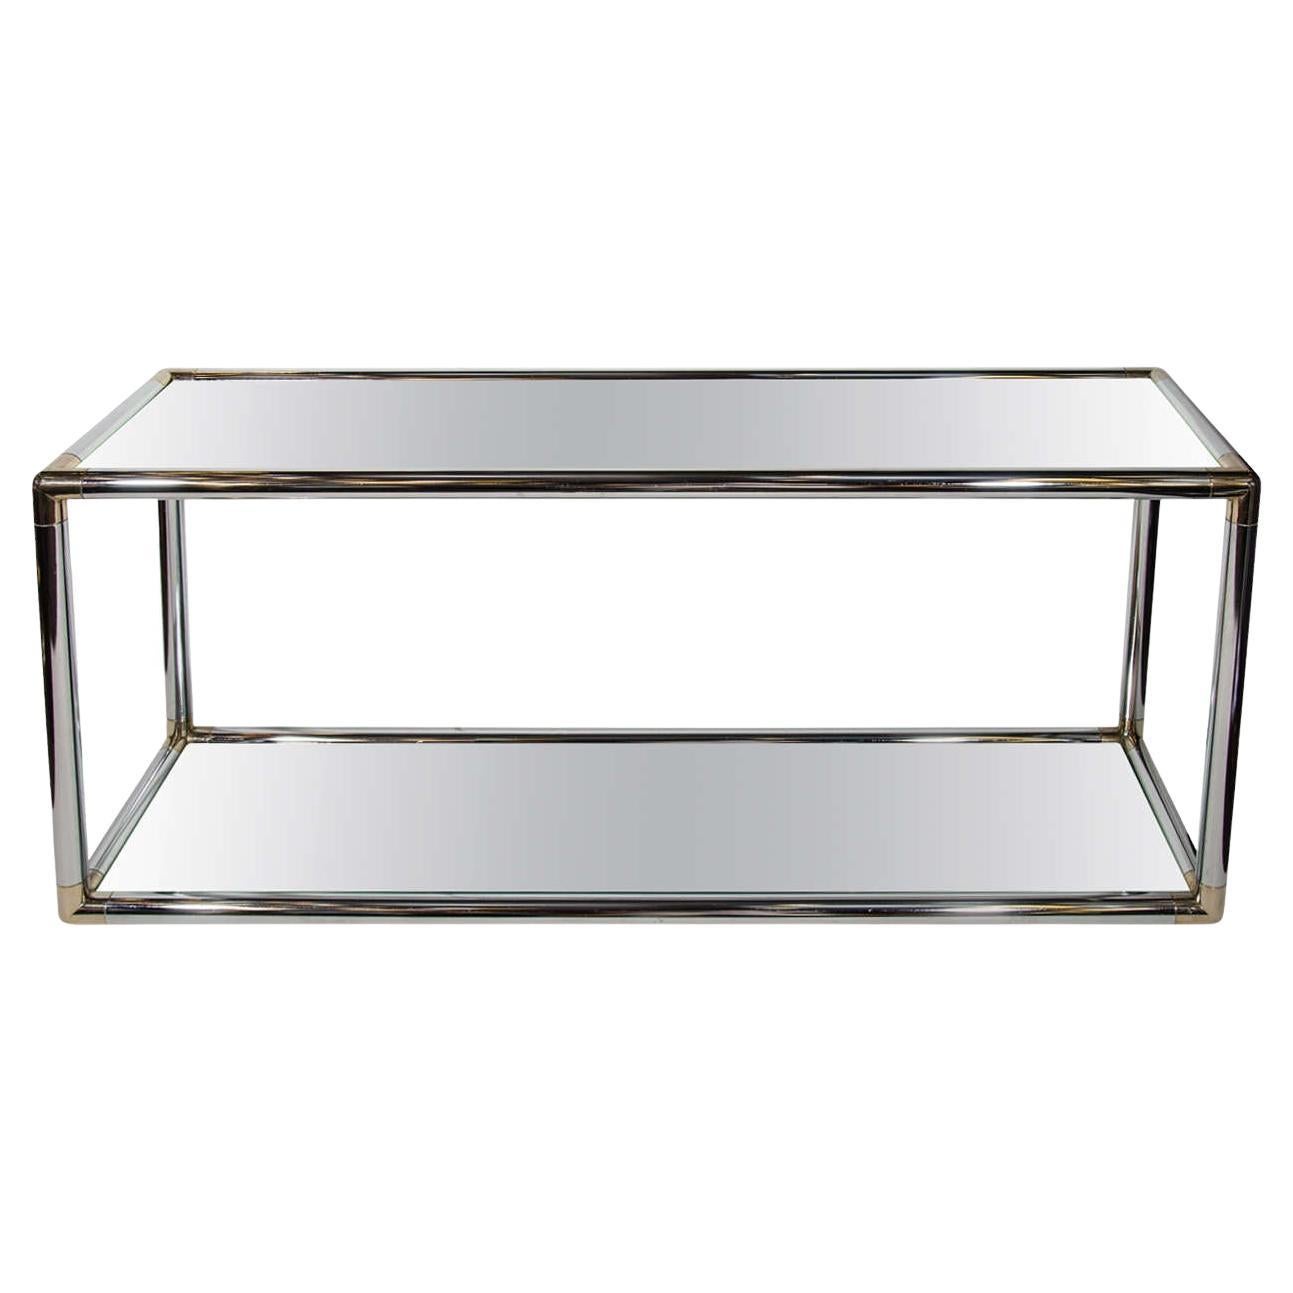 Mid-Century Modern Chrome and Mirror Two-Tier Console Table, Italy c. 1970's